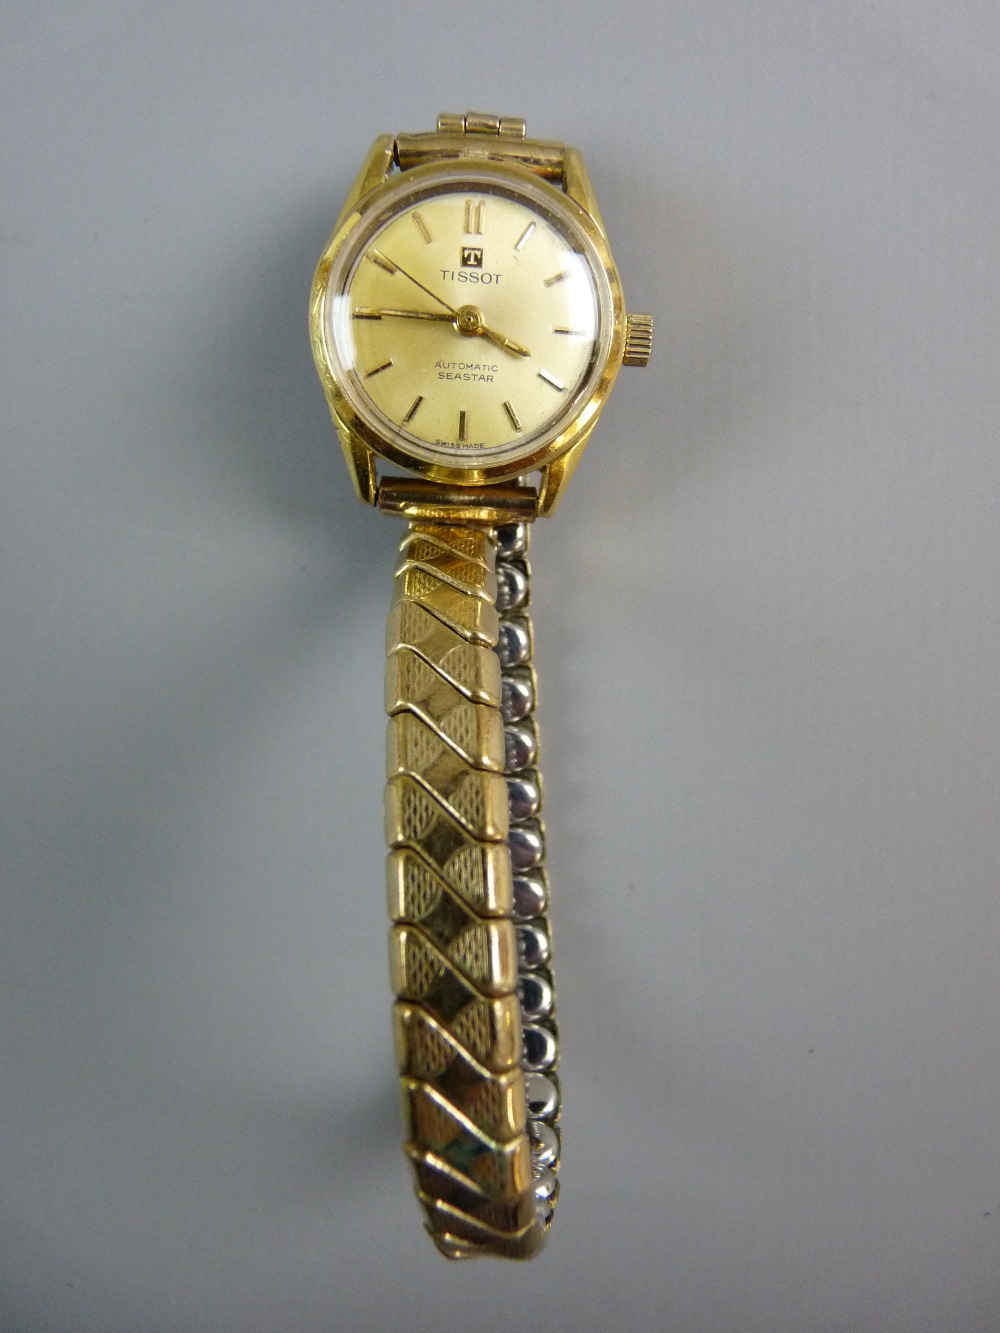 A TISSOT LADY'S AUTOMATIC C-STAR WRISTWATCH, entirely gold coloured with expanding strap